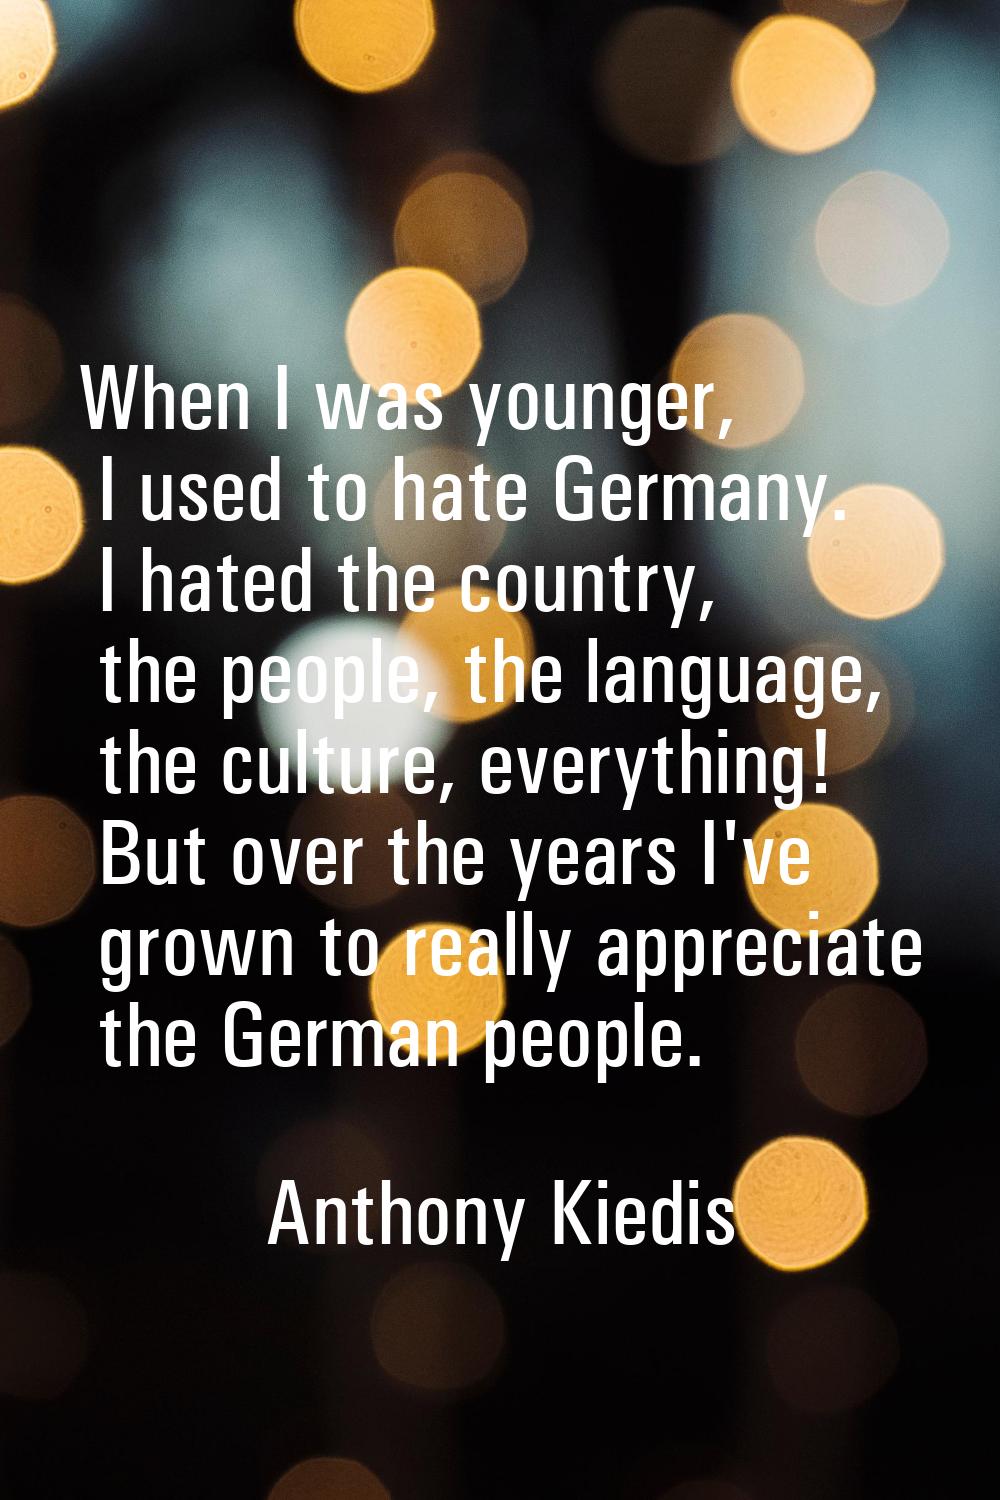 When I was younger, I used to hate Germany. I hated the country, the people, the language, the cult